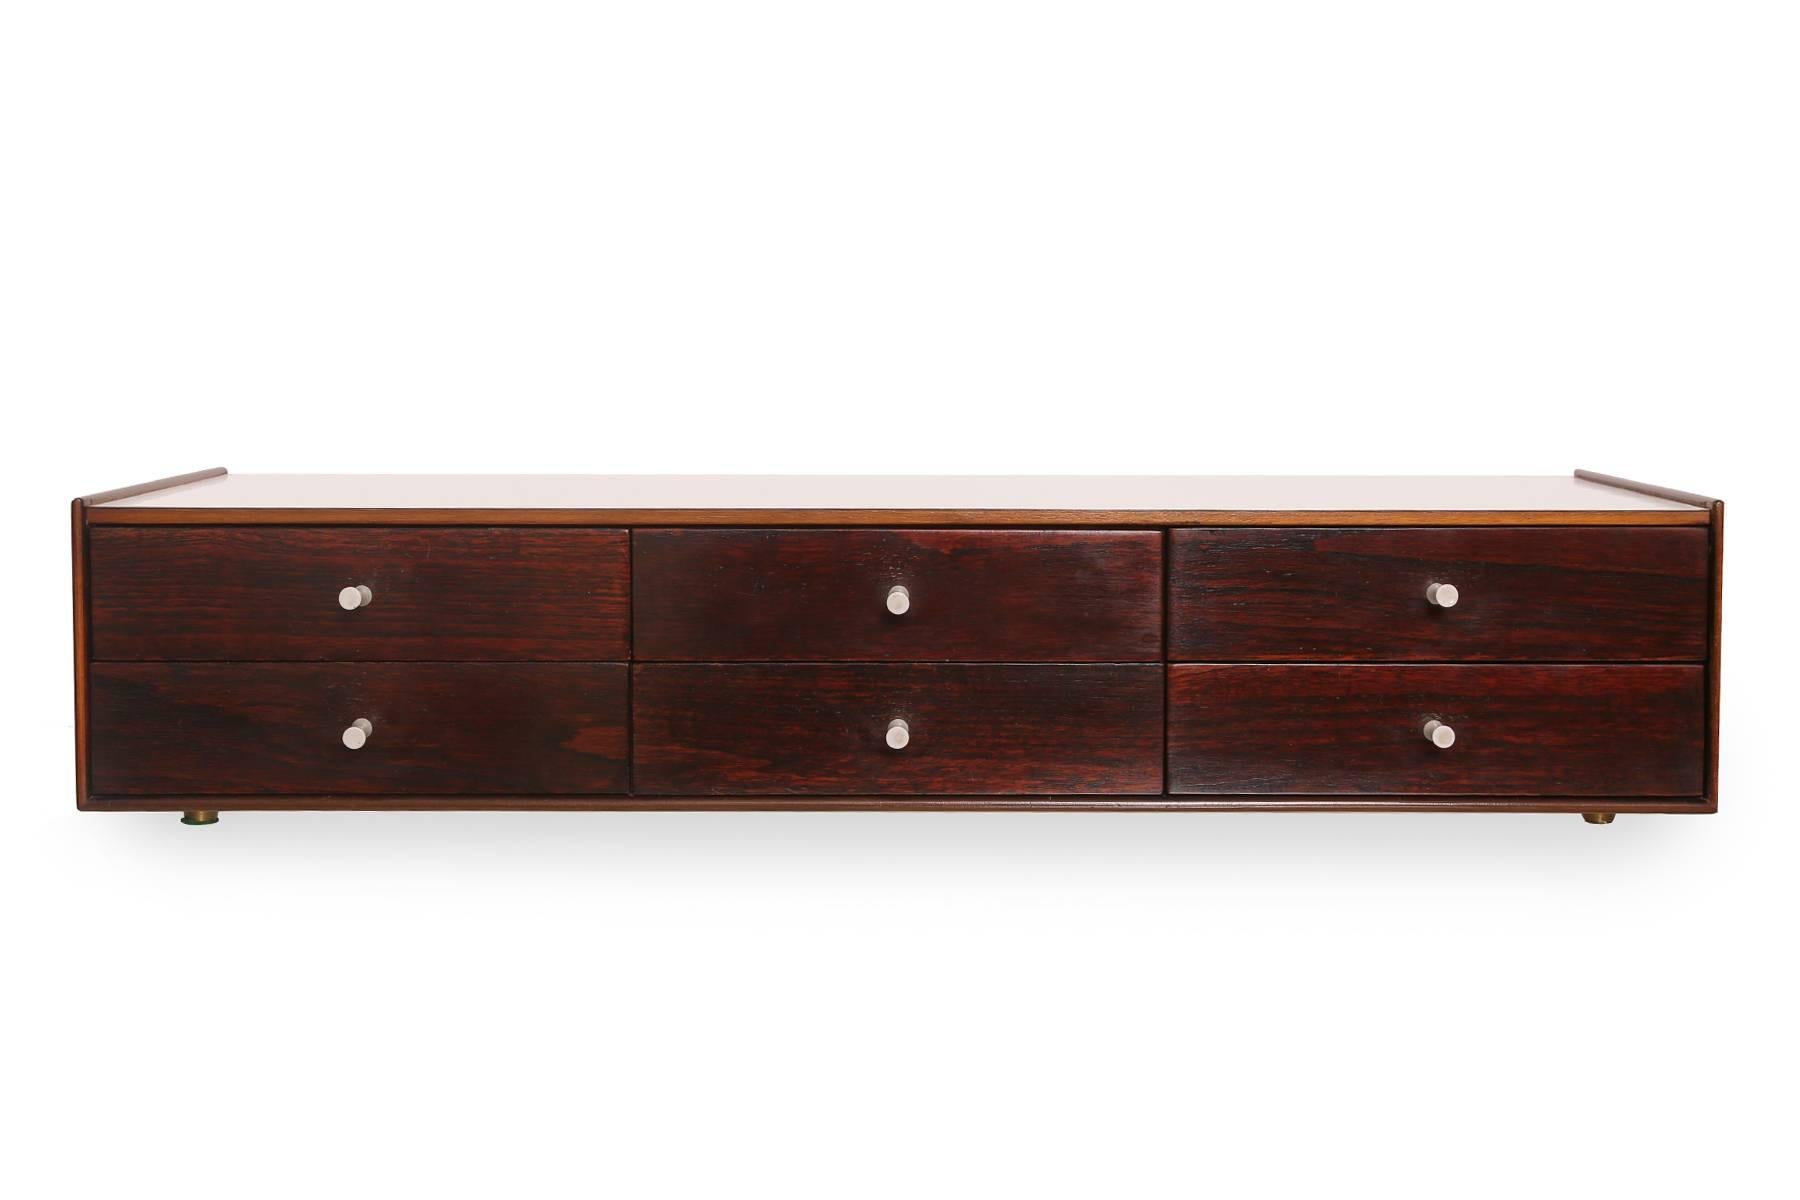 Rare and early George Nelson for Herman Miller jewelry chest, circa early 1950s. This seldom seen example has rosewood drawer fronts, walnut sides and white laminate top. The pulls are the the original porcelain. Retains foil label and drawer